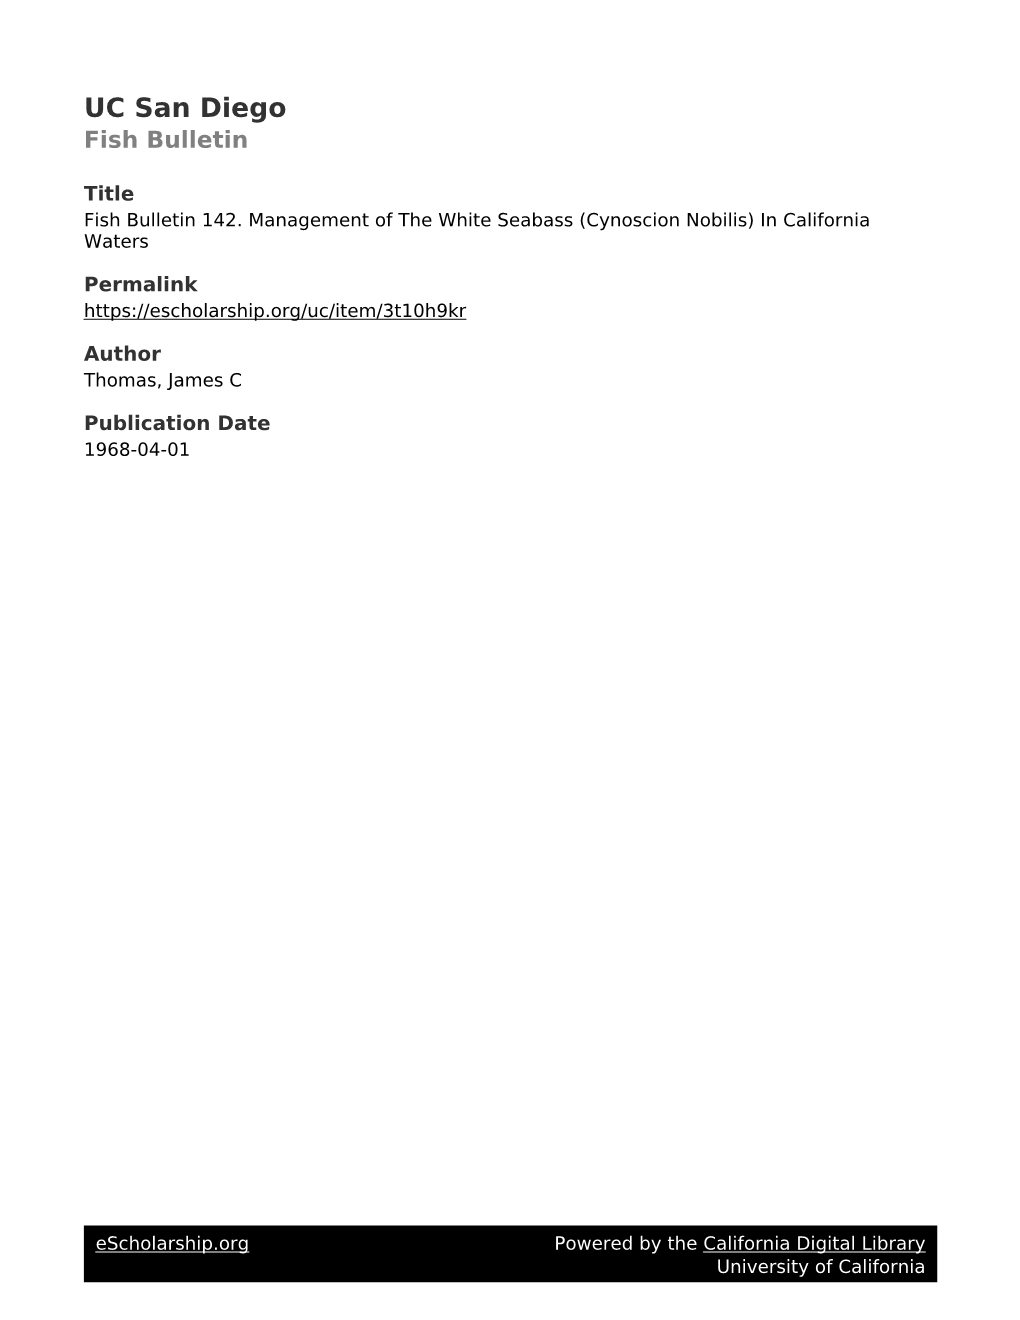 Fish Bulletin 142. Management of the White Seabass (Cynoscion Nobilis) in California Waters